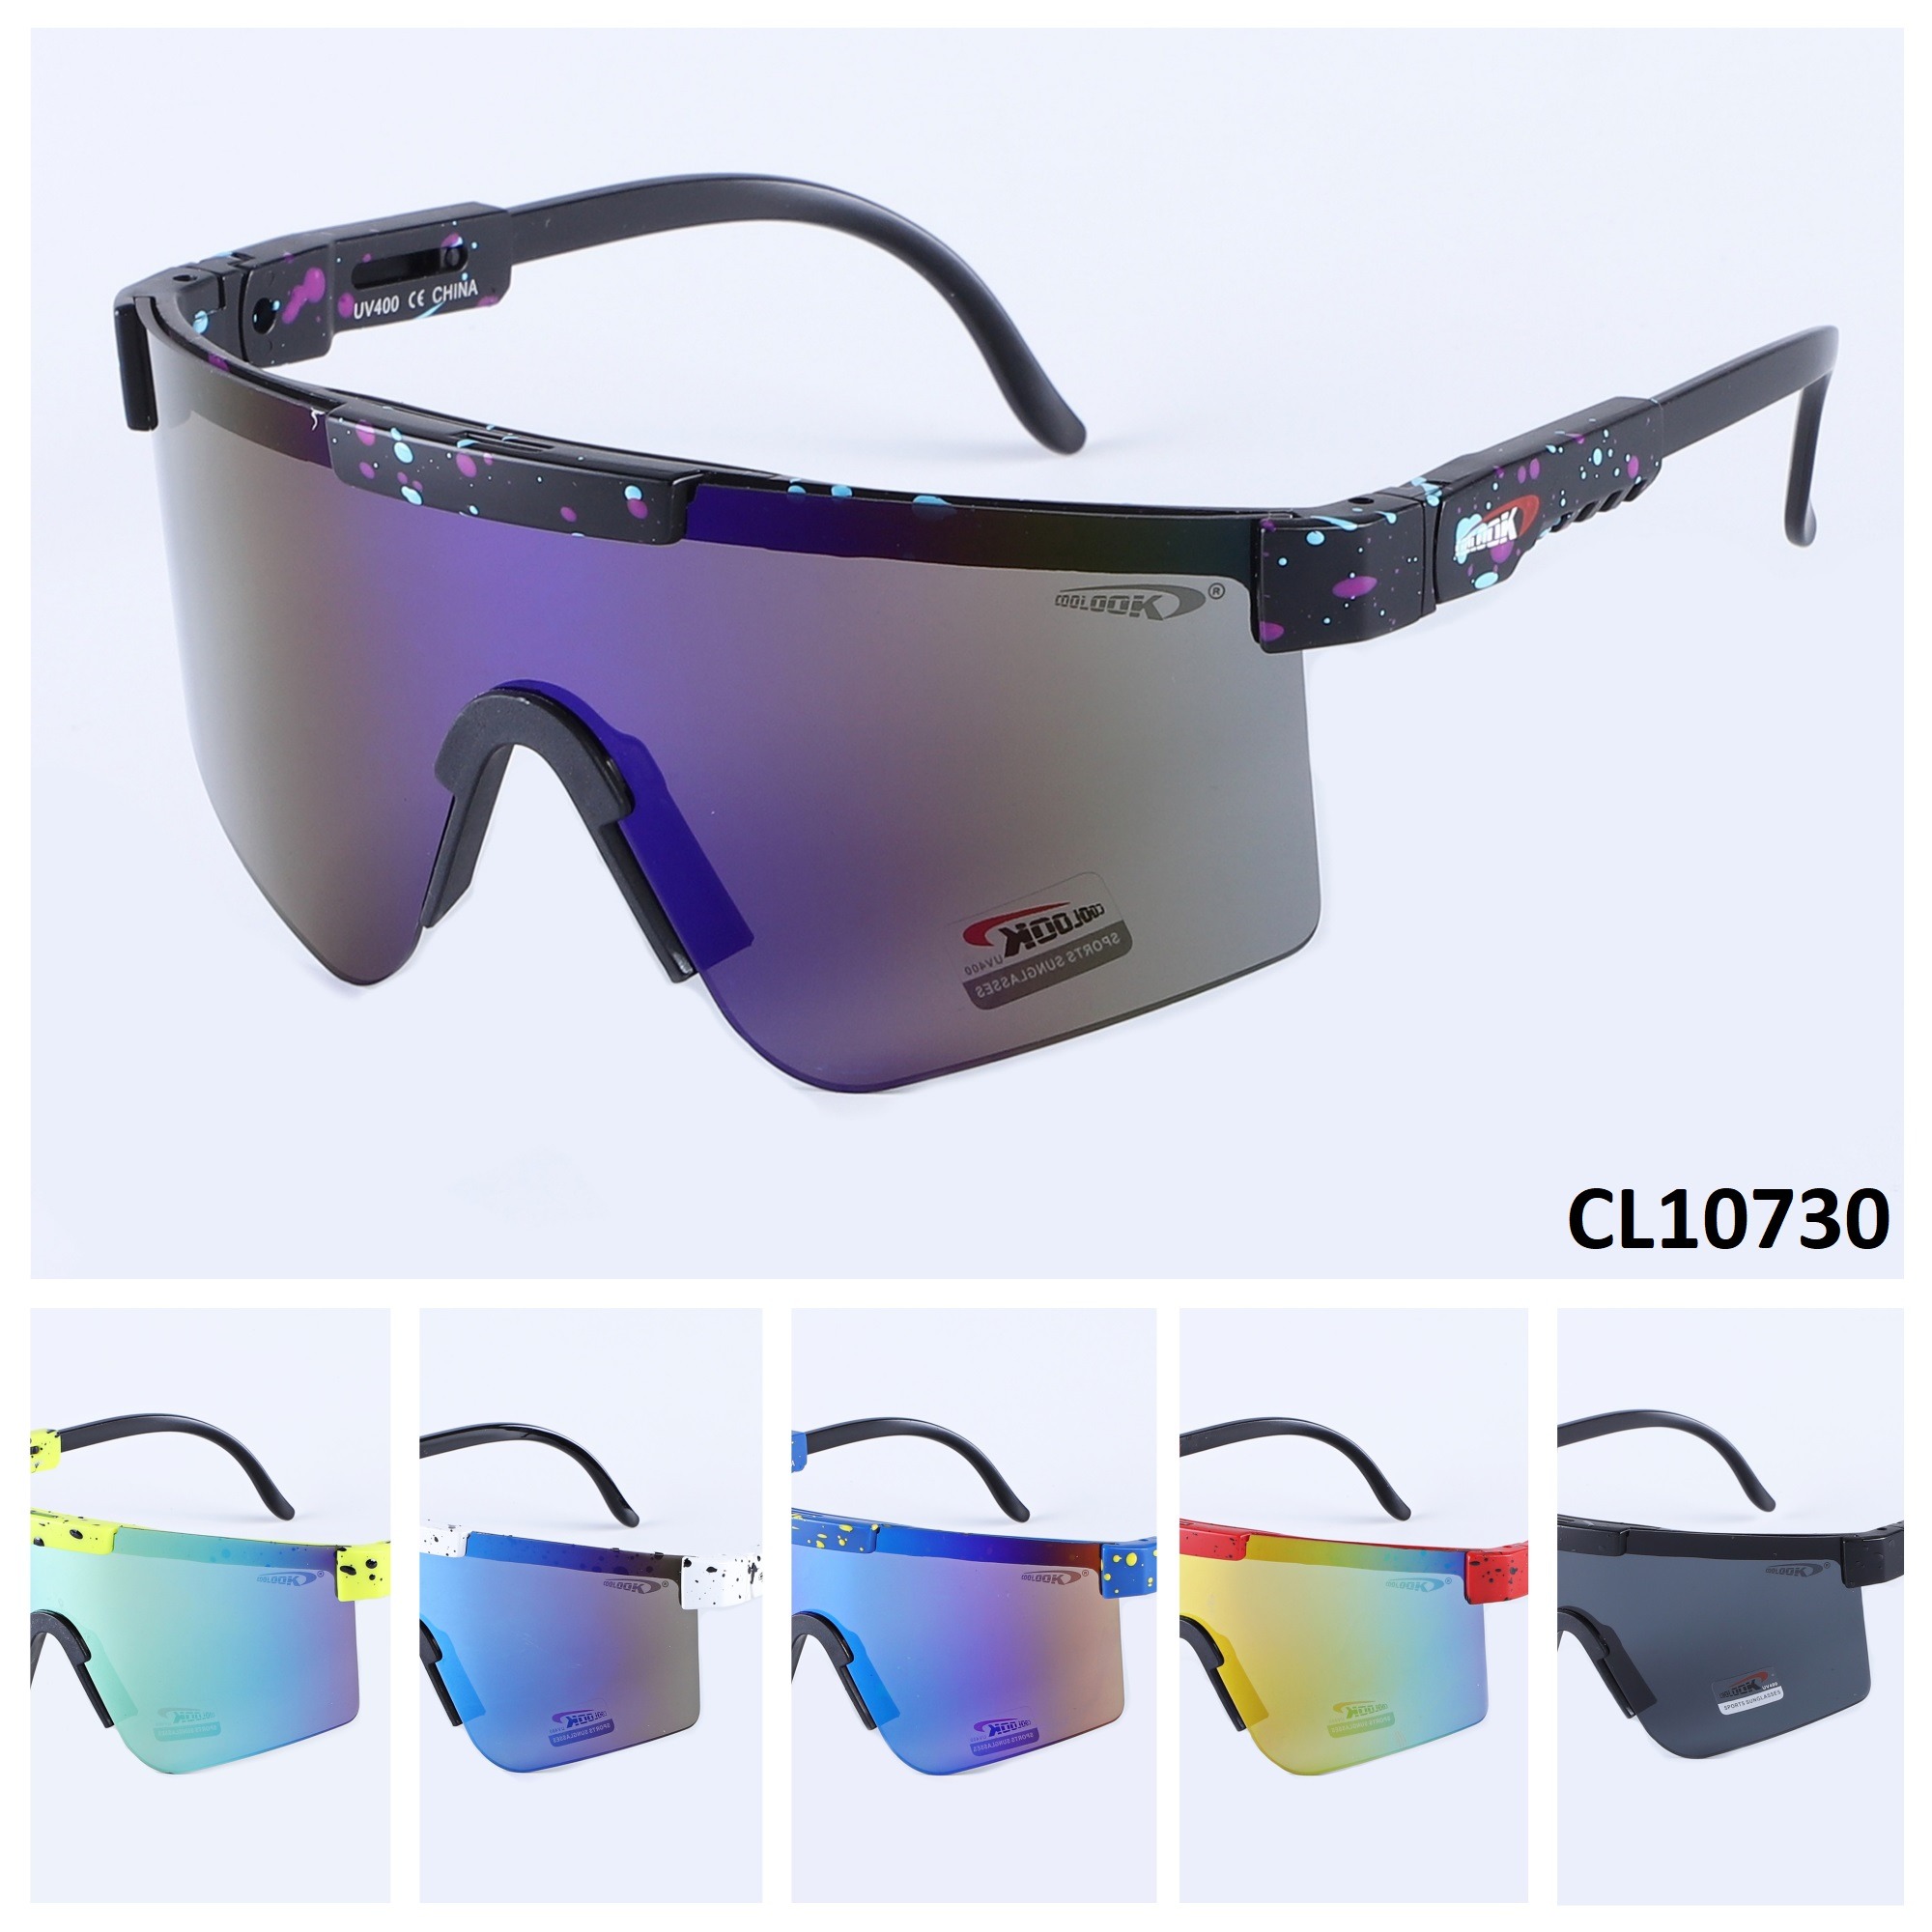 Coolook Sport Sunglasses 1378